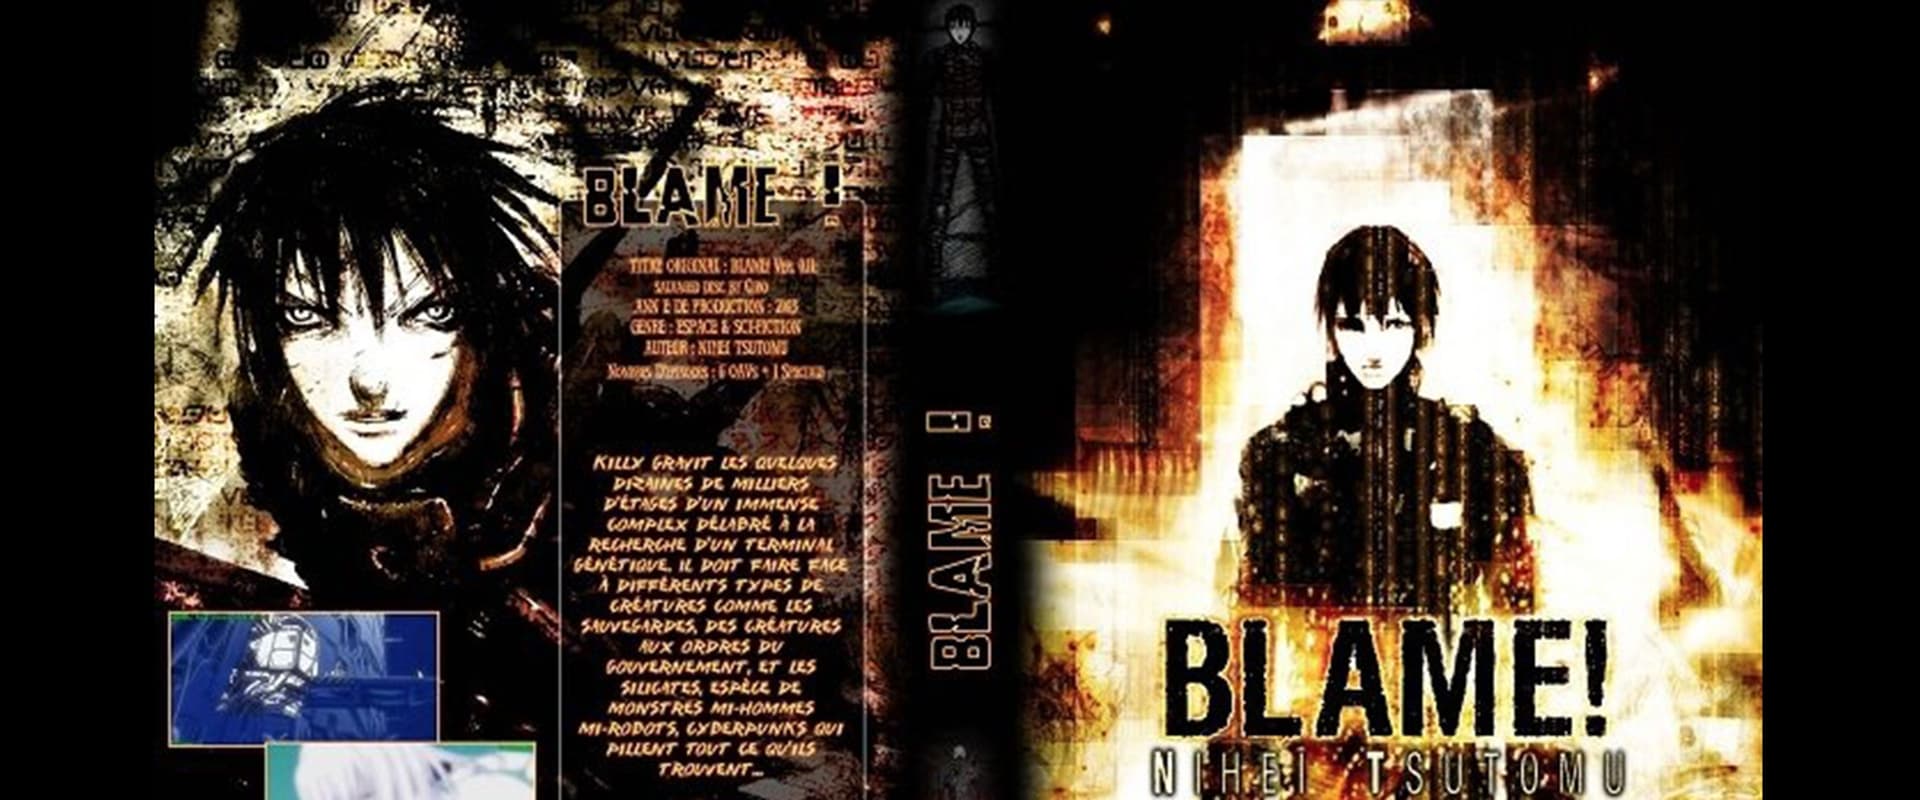 BLAME! Ver. 0.11 Salvaged disc by Cibo